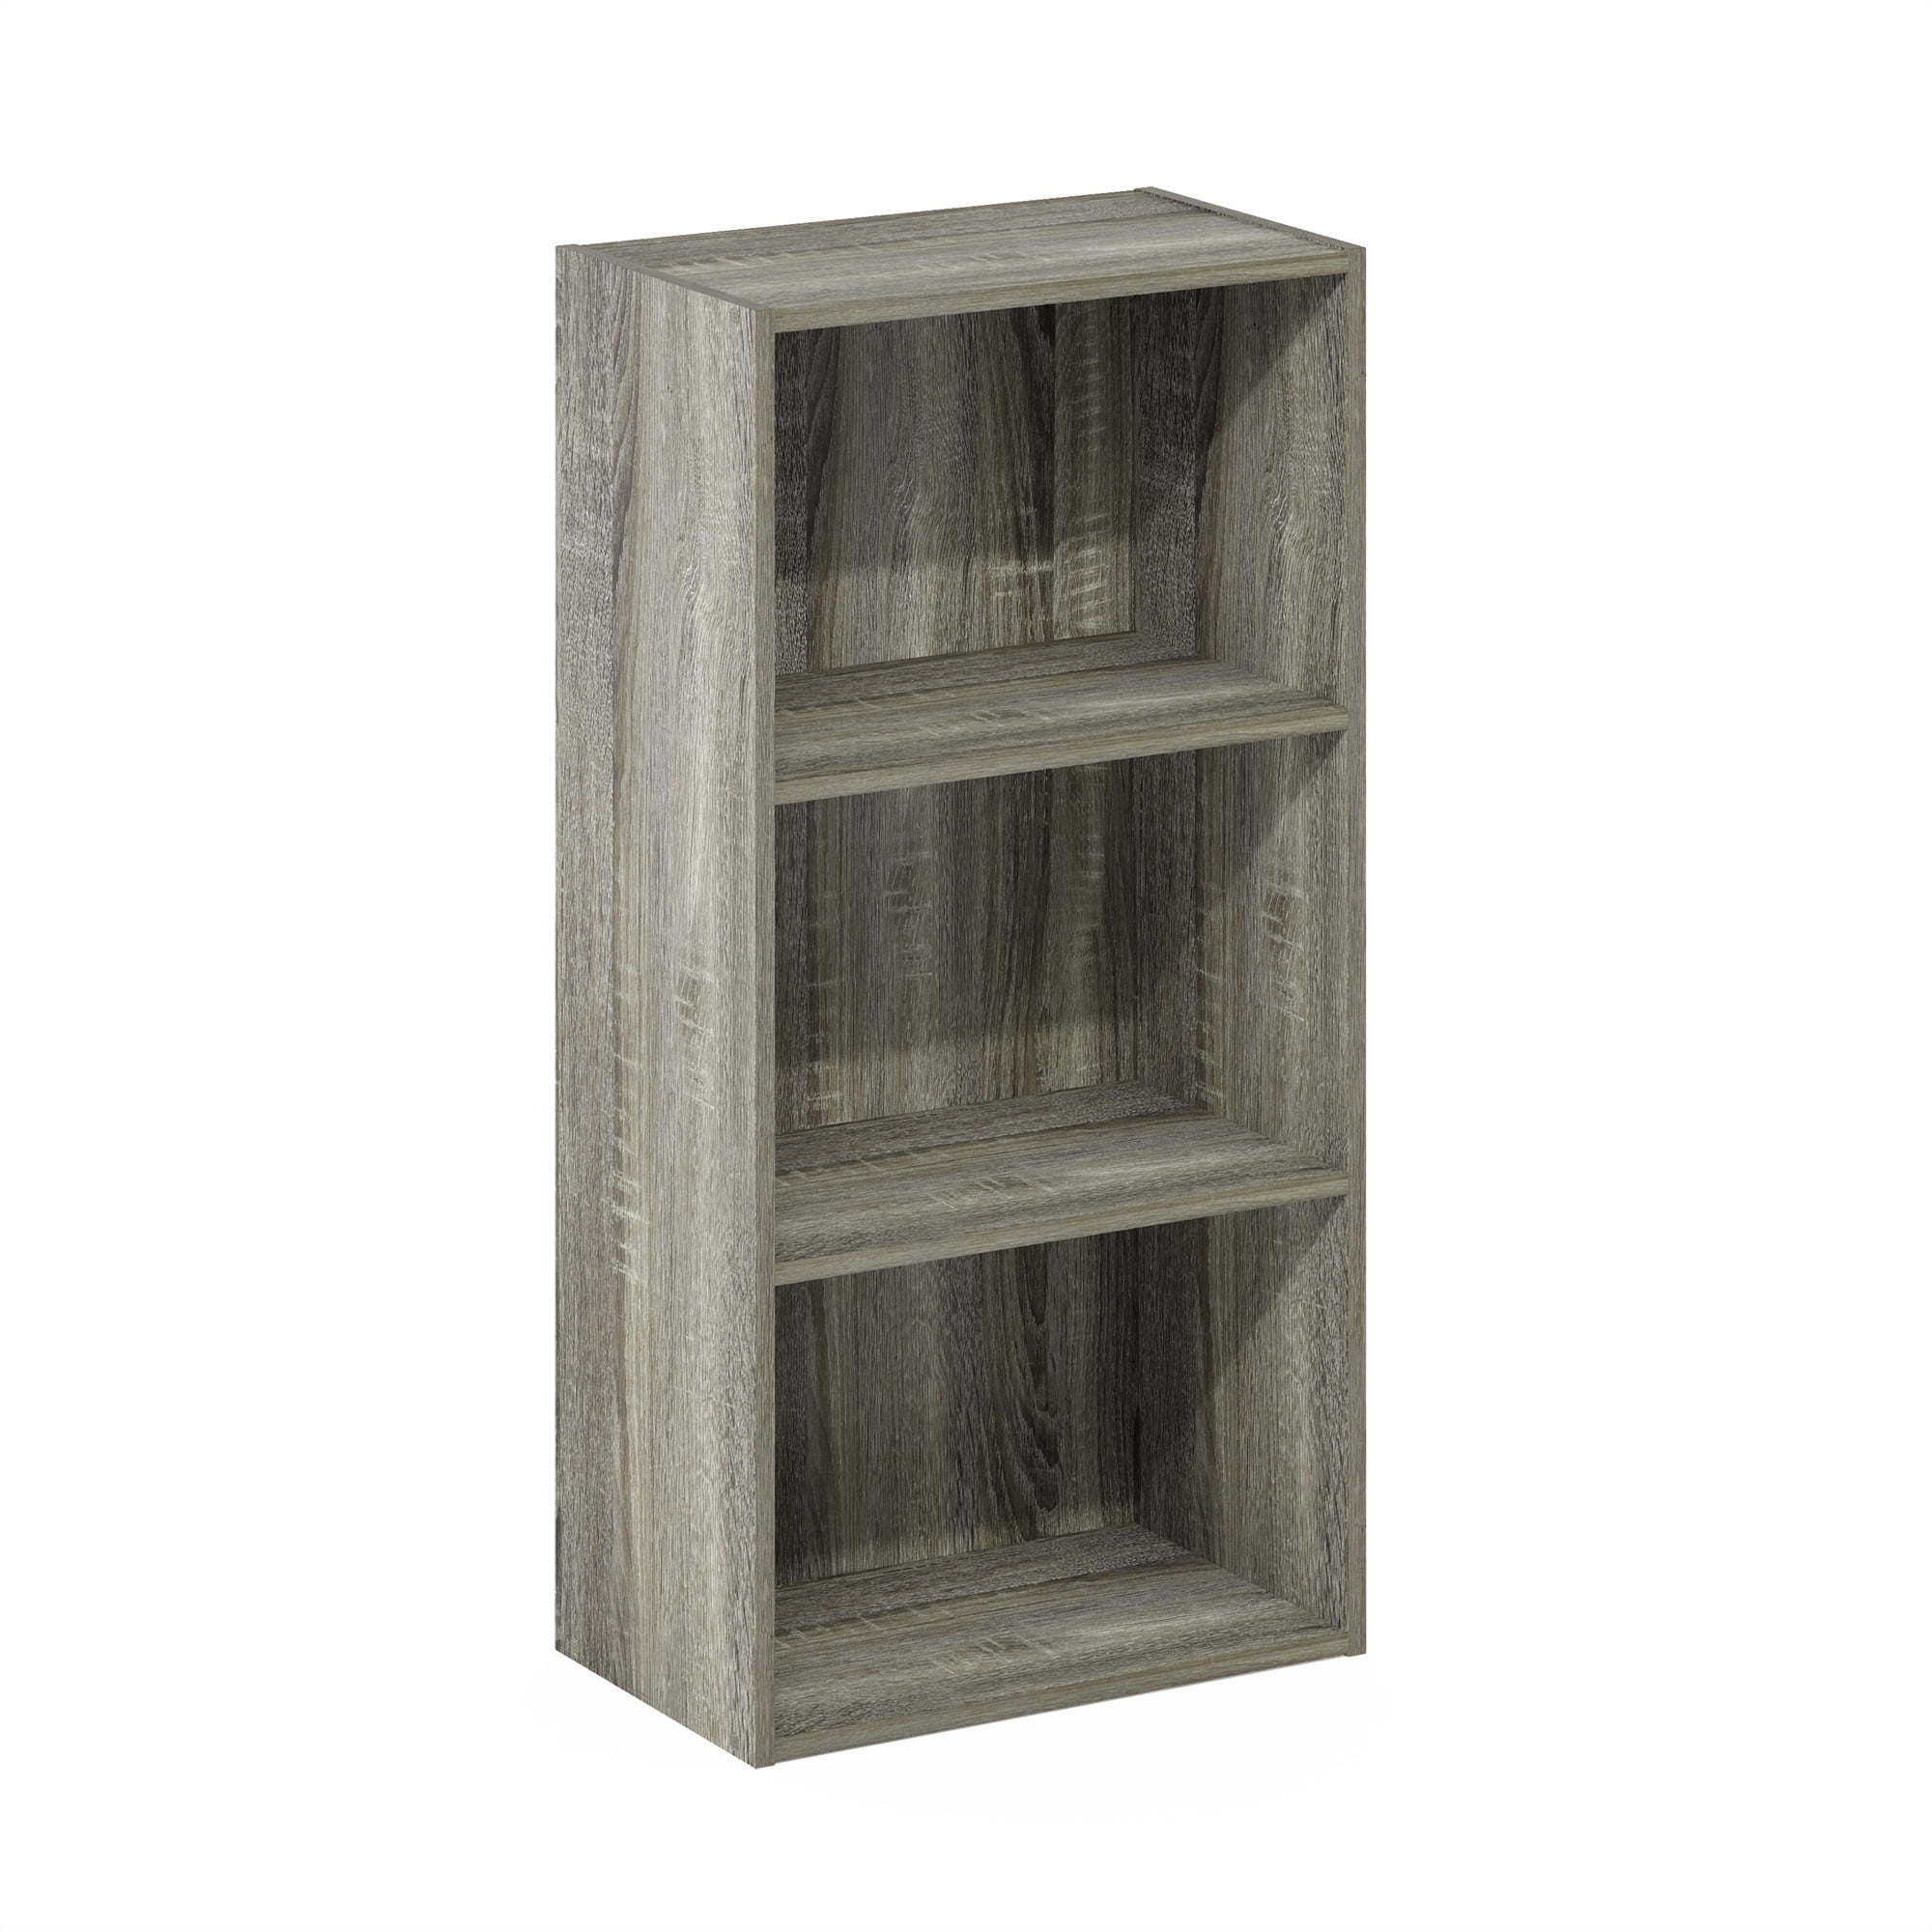 French Oak Grey Furinno Wall Mounted Shelves one size Wood 